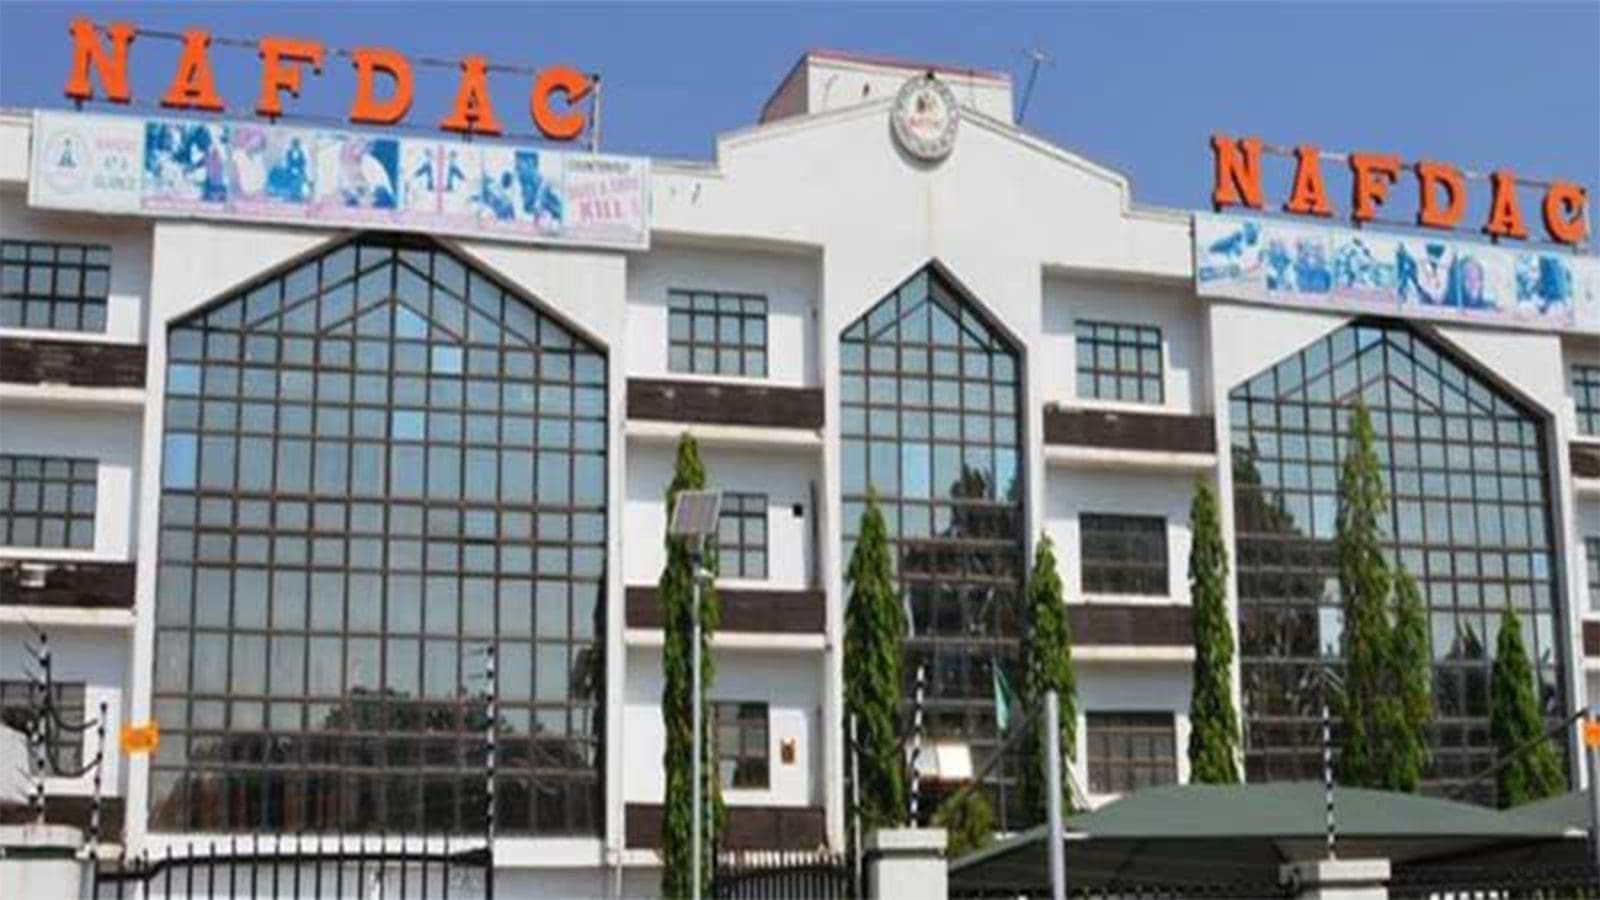 NAFDAC urges Nigerians to consume safe wholesome food to boost immunity